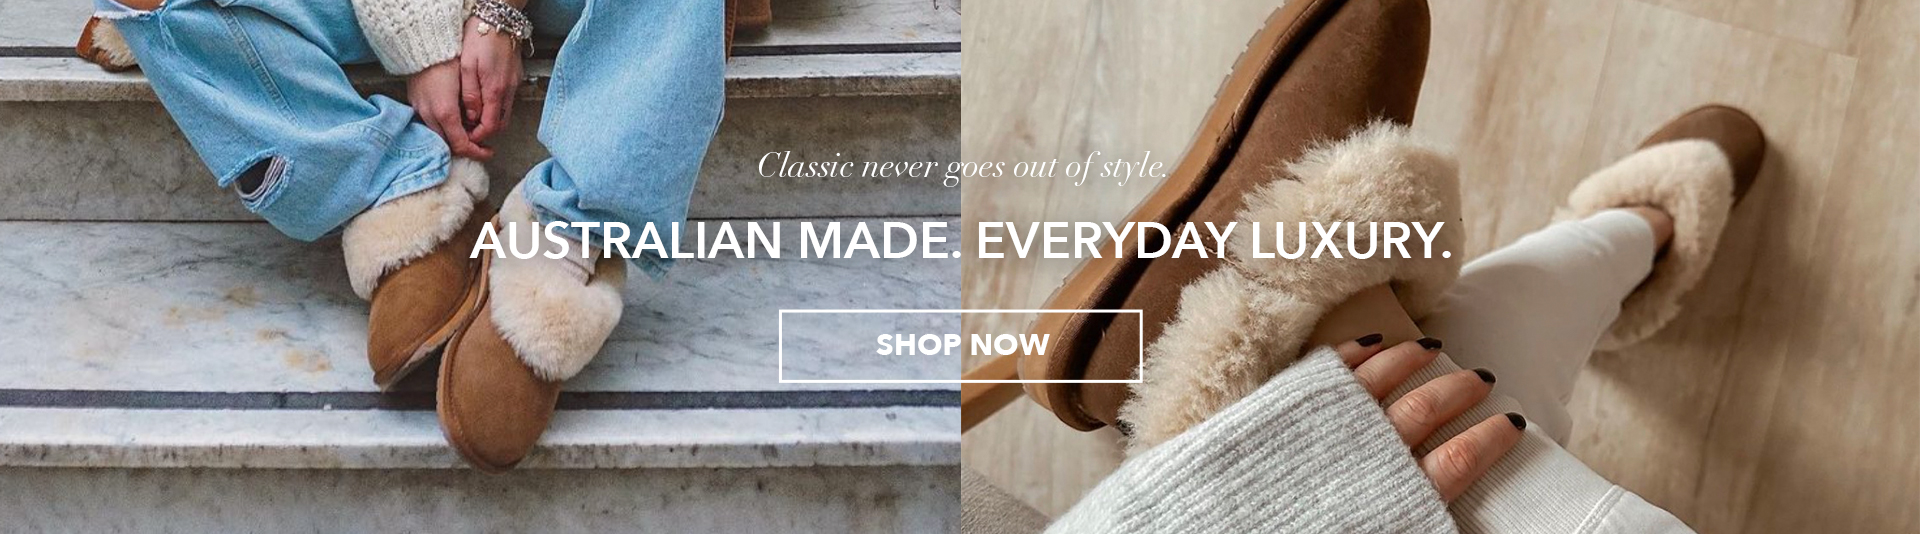 Woman wearing Platinum Mintaro sheepskin slippers. Classic never goes out of style. Australian Made. Everyday Luxury. Shop Now.